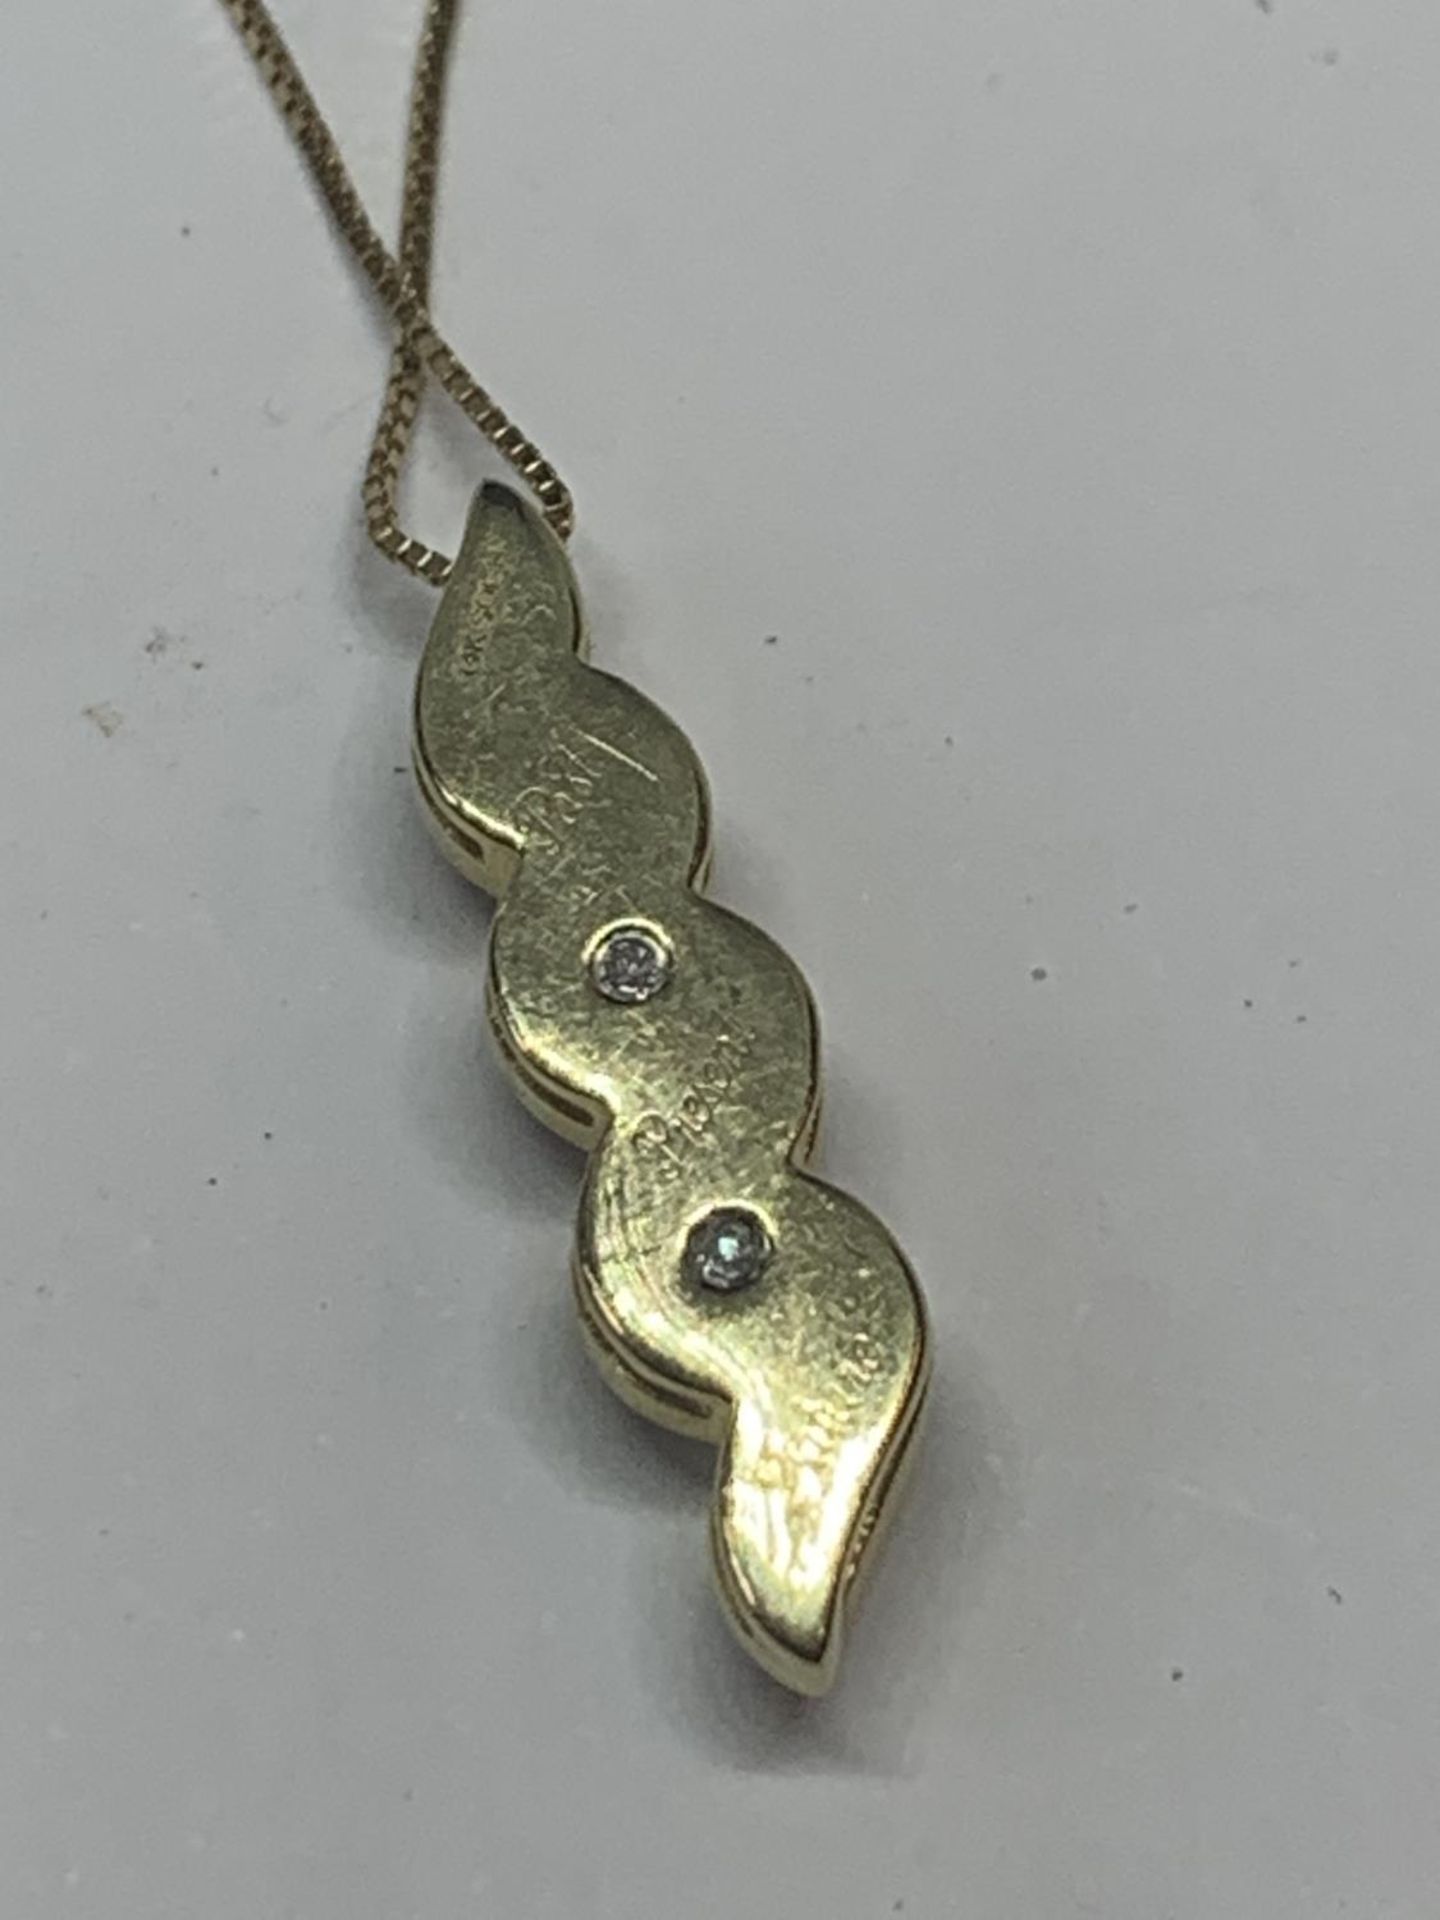 A 14 CARAT GOLD DROP PENDANT WITH APPROXIMATELY 1 CARAT OF DIAMONDS CHAIN LENGTH 45CM - Image 6 of 6